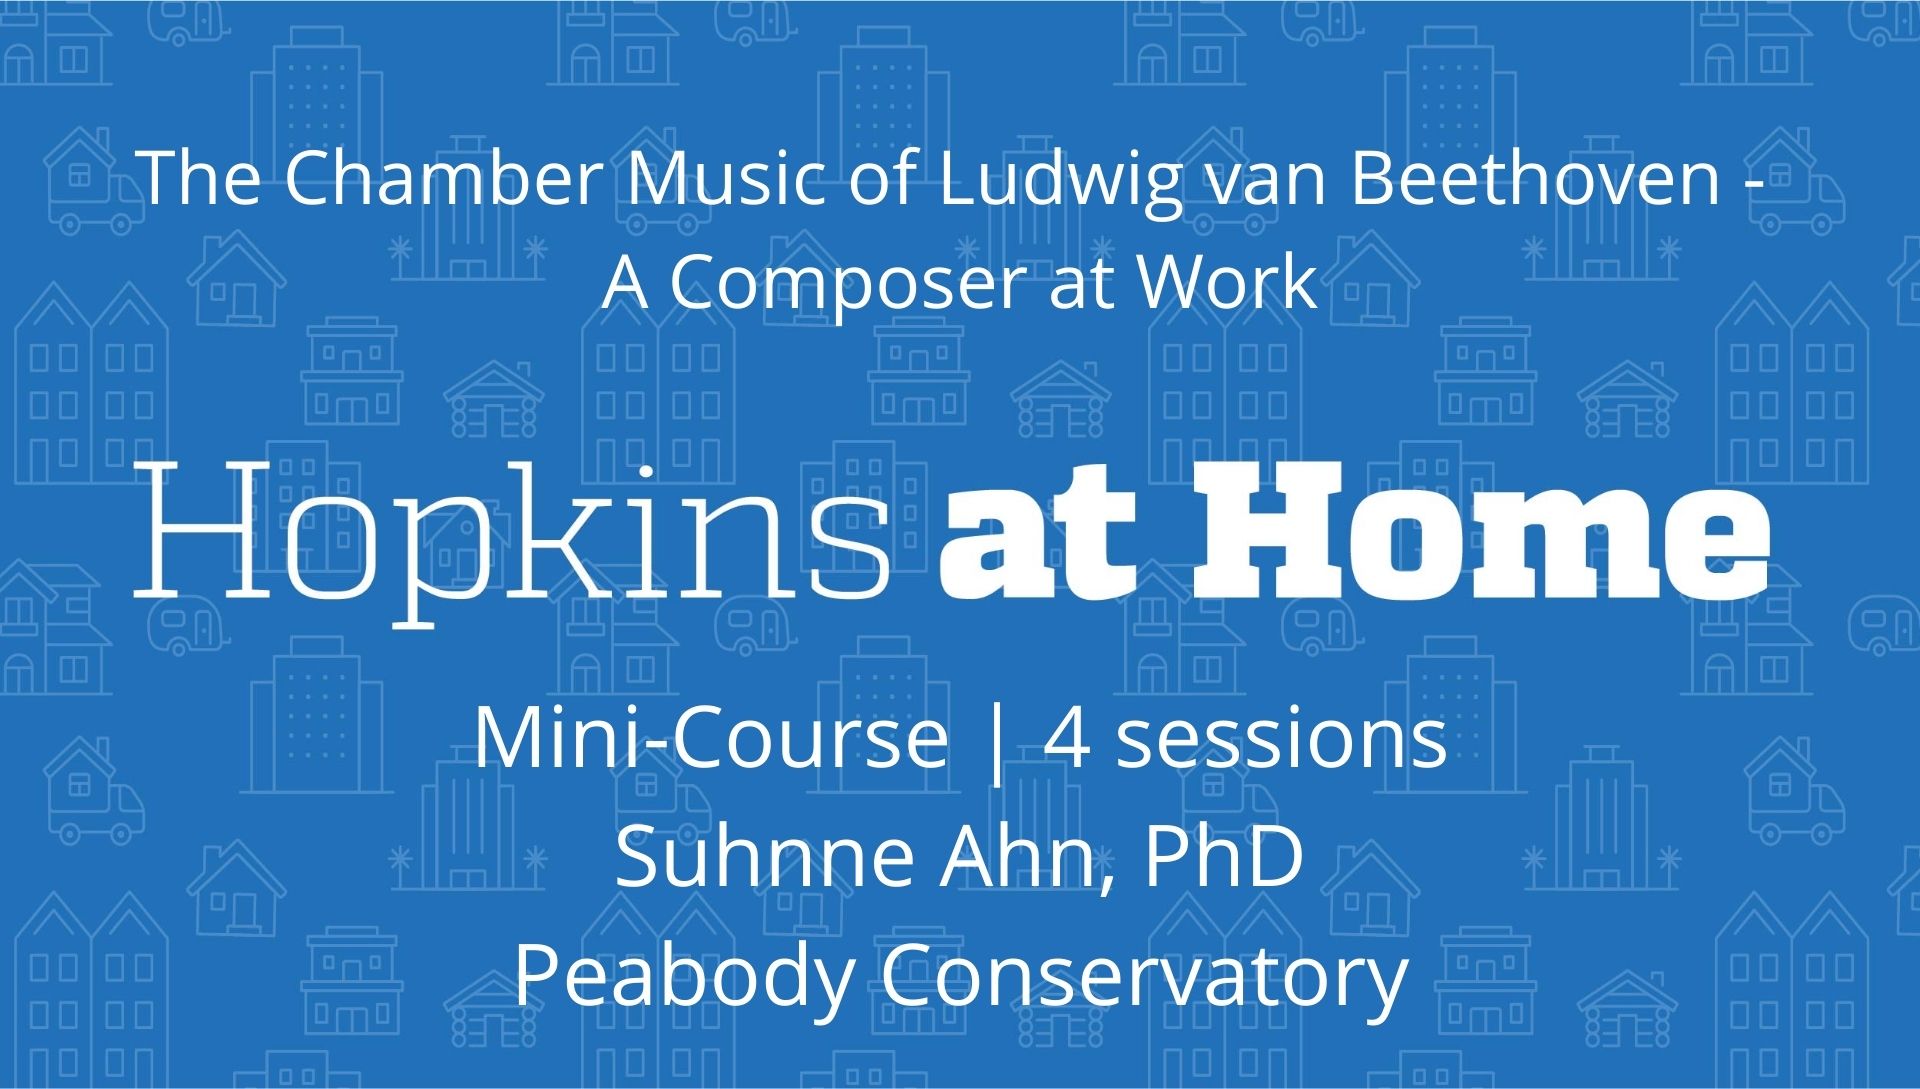 The Chamber Music of Ludwig van Beethoven - A Composer at Work